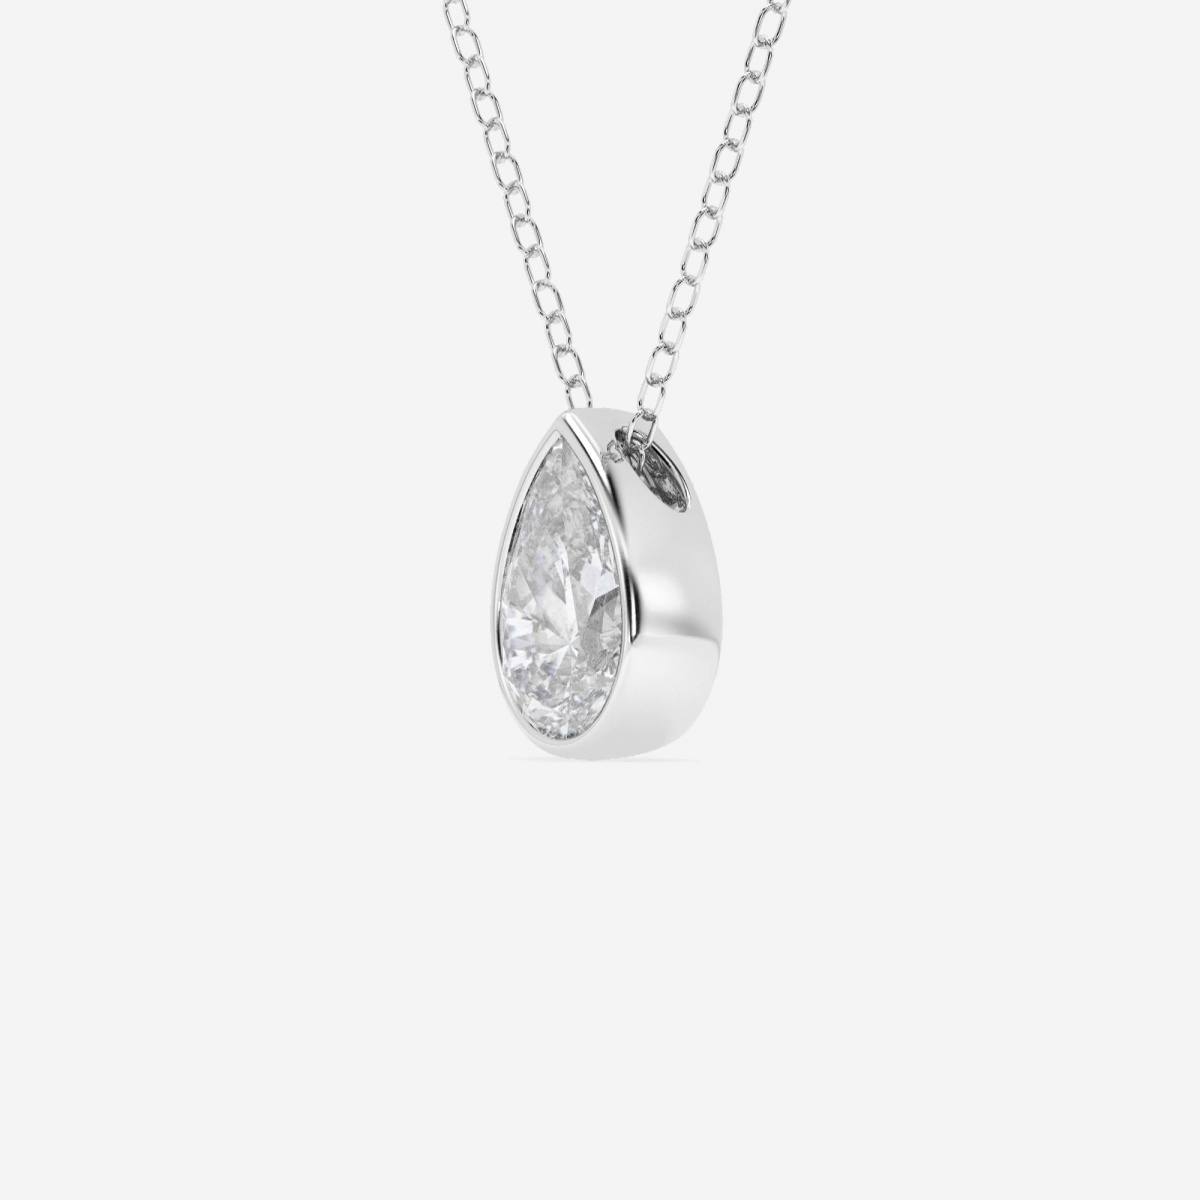 Additional Image 1 for  1 ctw Pear Lab Grown Diamond Bezel Set Solitaire Pendant with Adjustable Chain